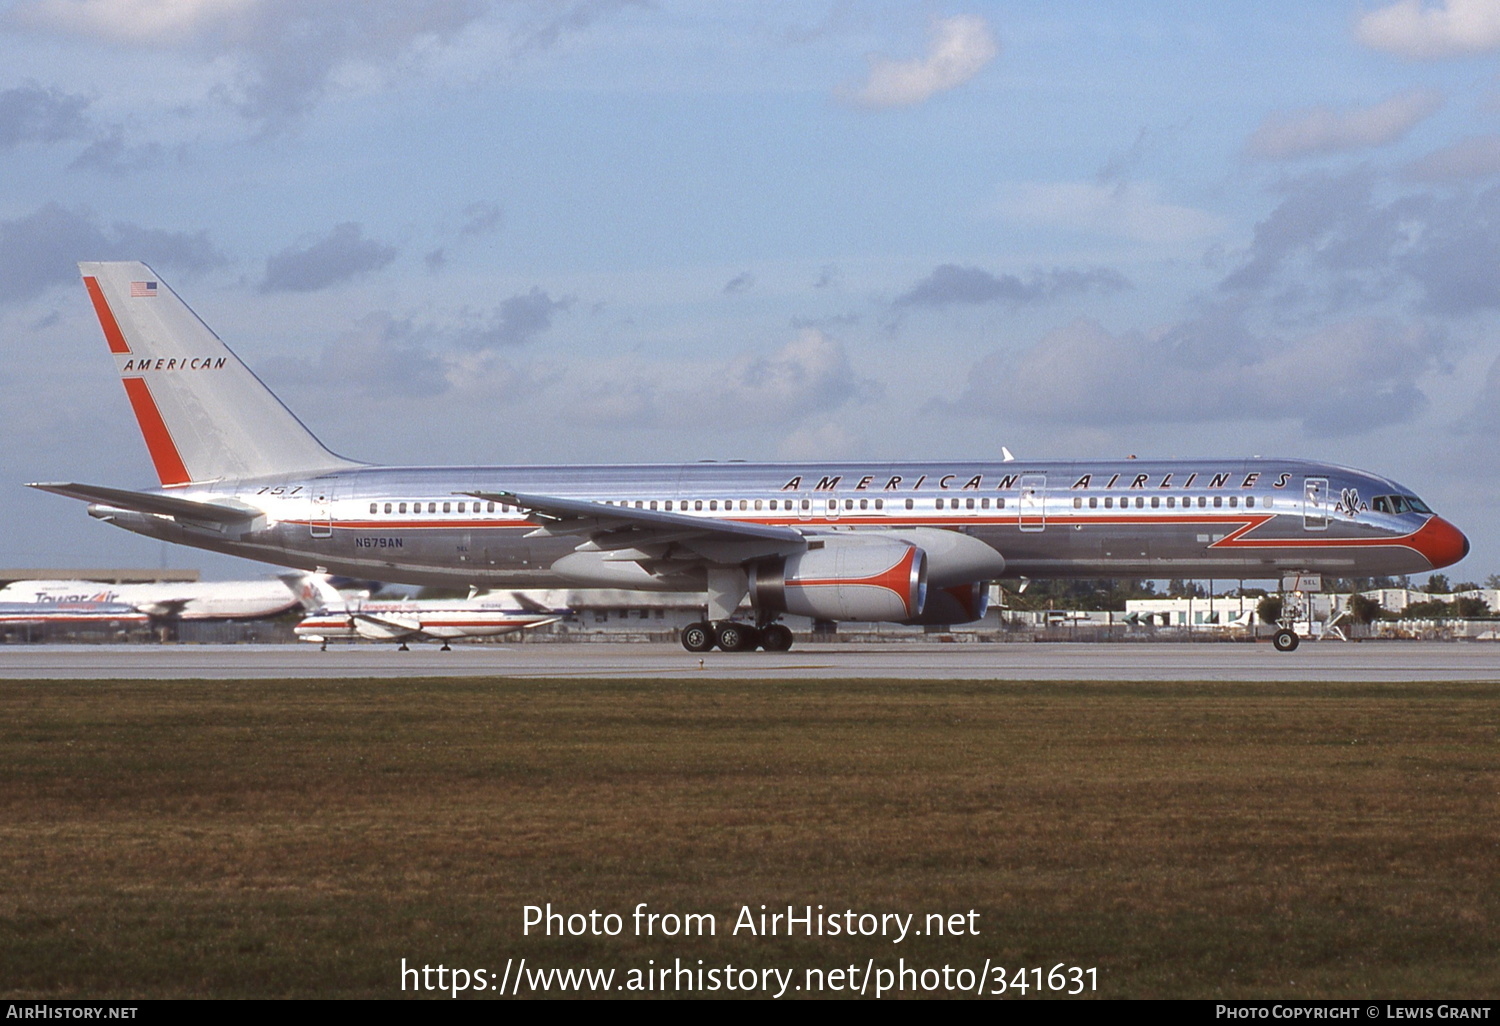 American Airlines 757-200 “Astrojet livery” : r/aviationliveries